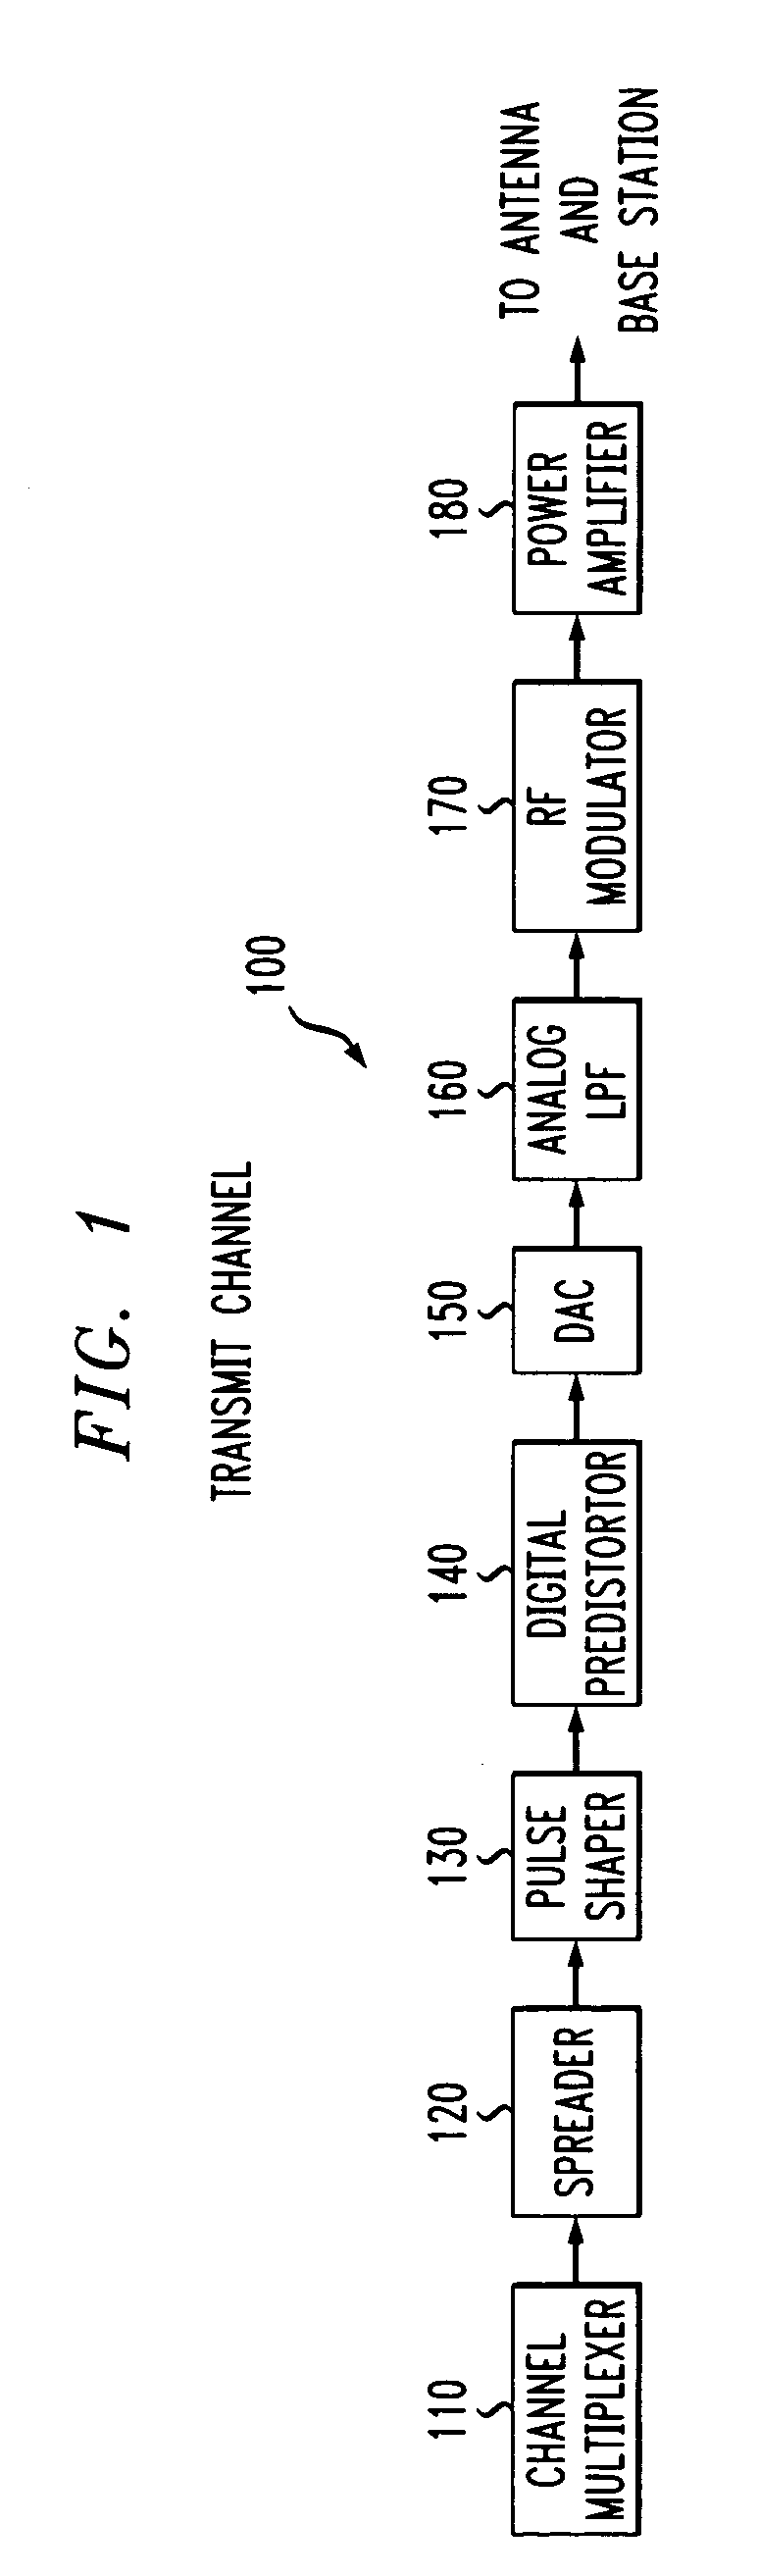 Digital predistortion technique for WCDMA wireless communication system and method of operation thereof